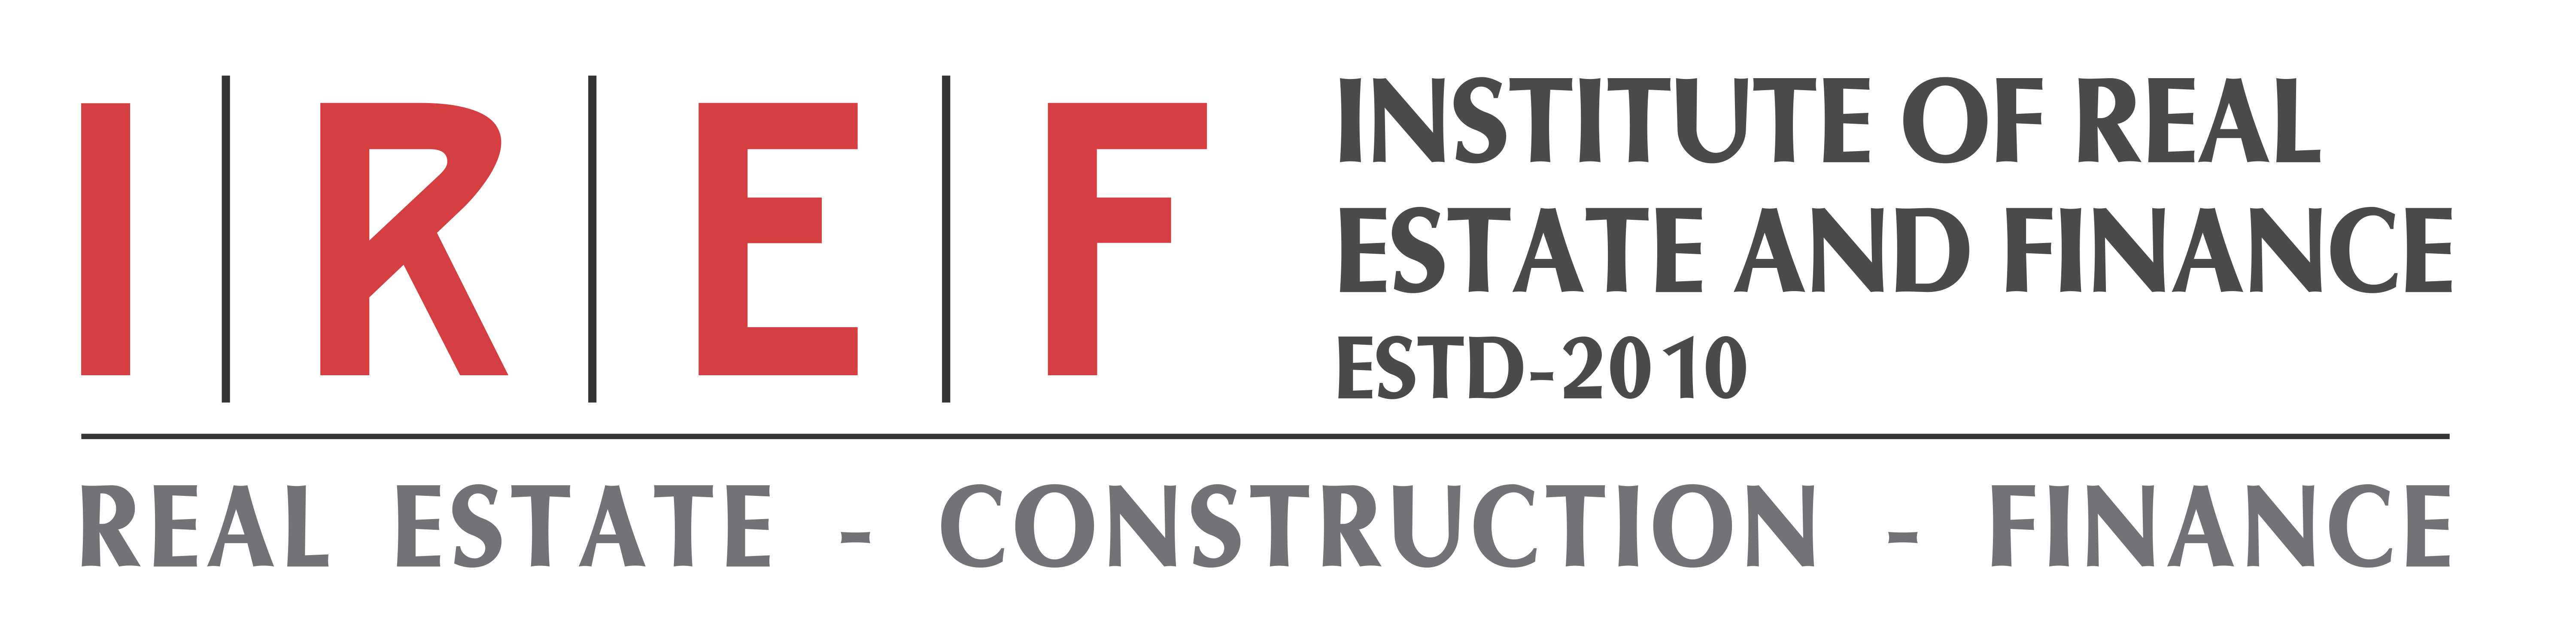 IREF International _Ex MBA_Real Estate and Construction and Finance Management  IREFSUVPG001